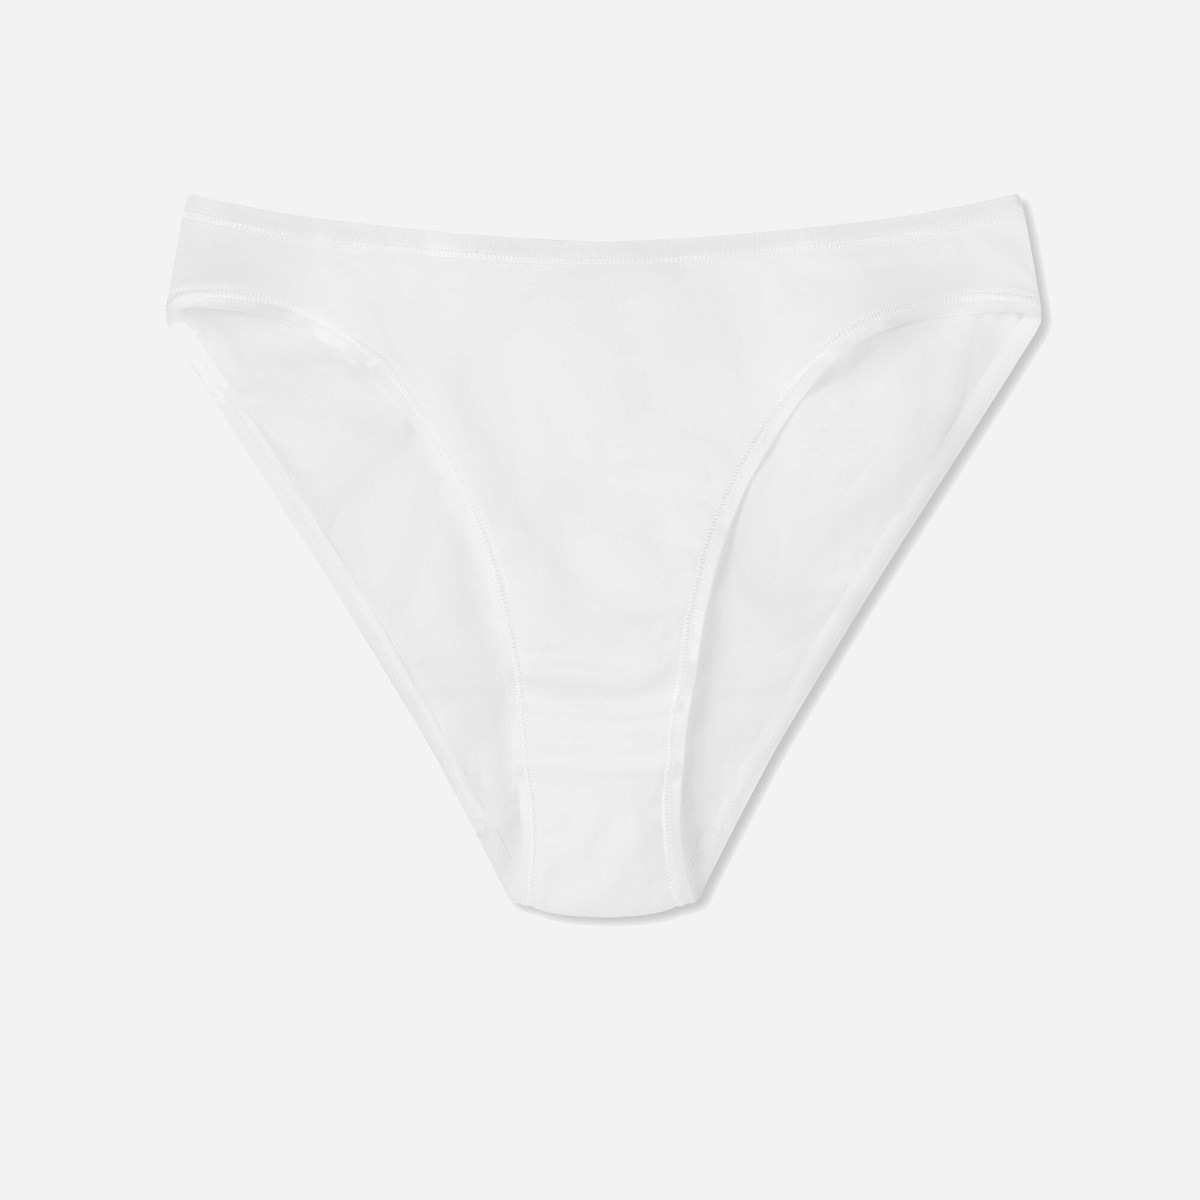 Just 21 Pairs of Comfy, Breathable, Simple (but Cute!) Cotton Underwear ...